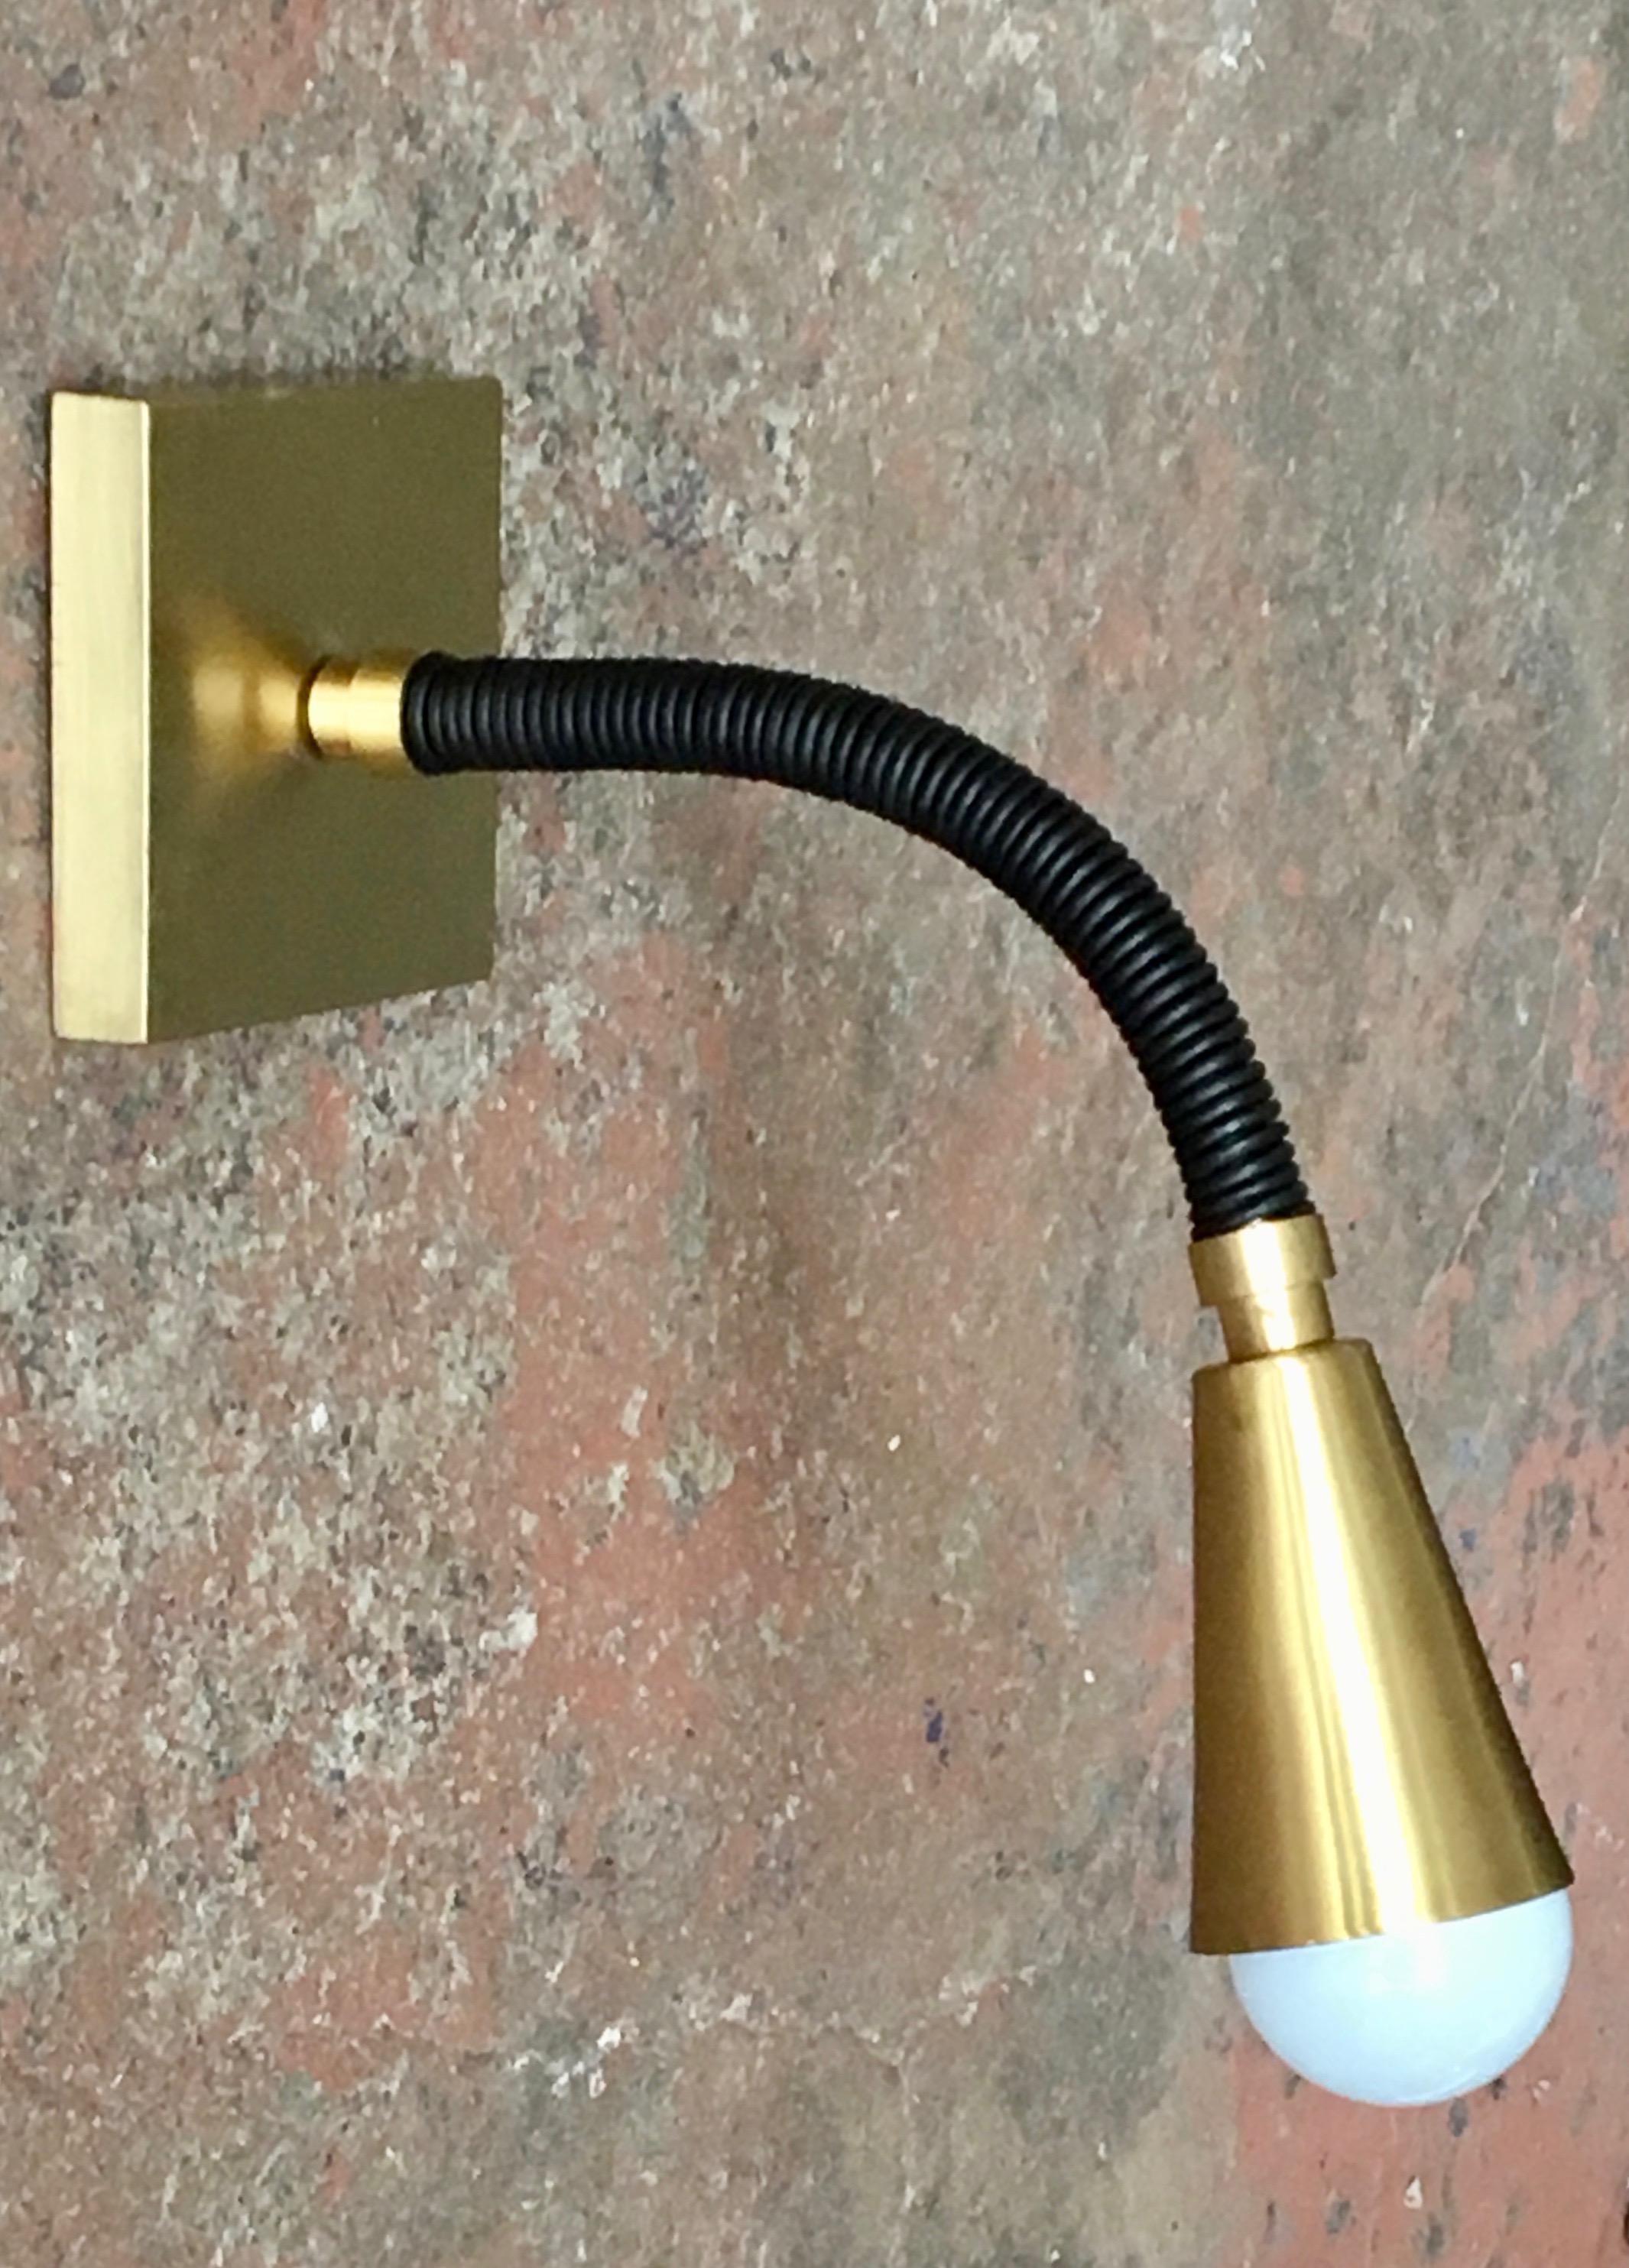 Adjustable swing arm reading light wall sconce, leather arm and solid brass fittings. Meander Lighting comes in over 30 leather colors, and many custom options are available. Measurements depend on how the arm is posed. As shown, leather arm is 12